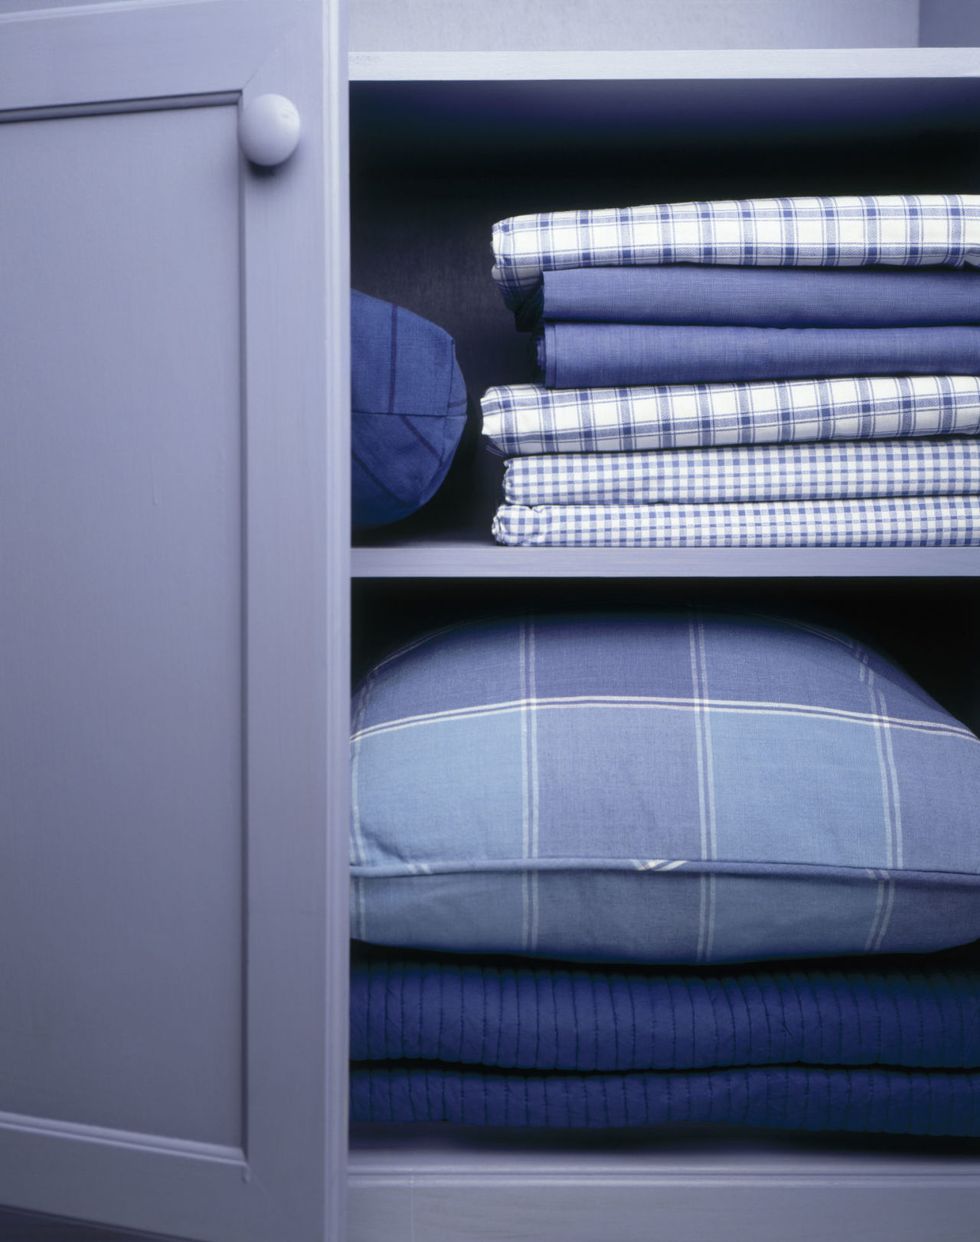 Bed sheets and linen in cupboard